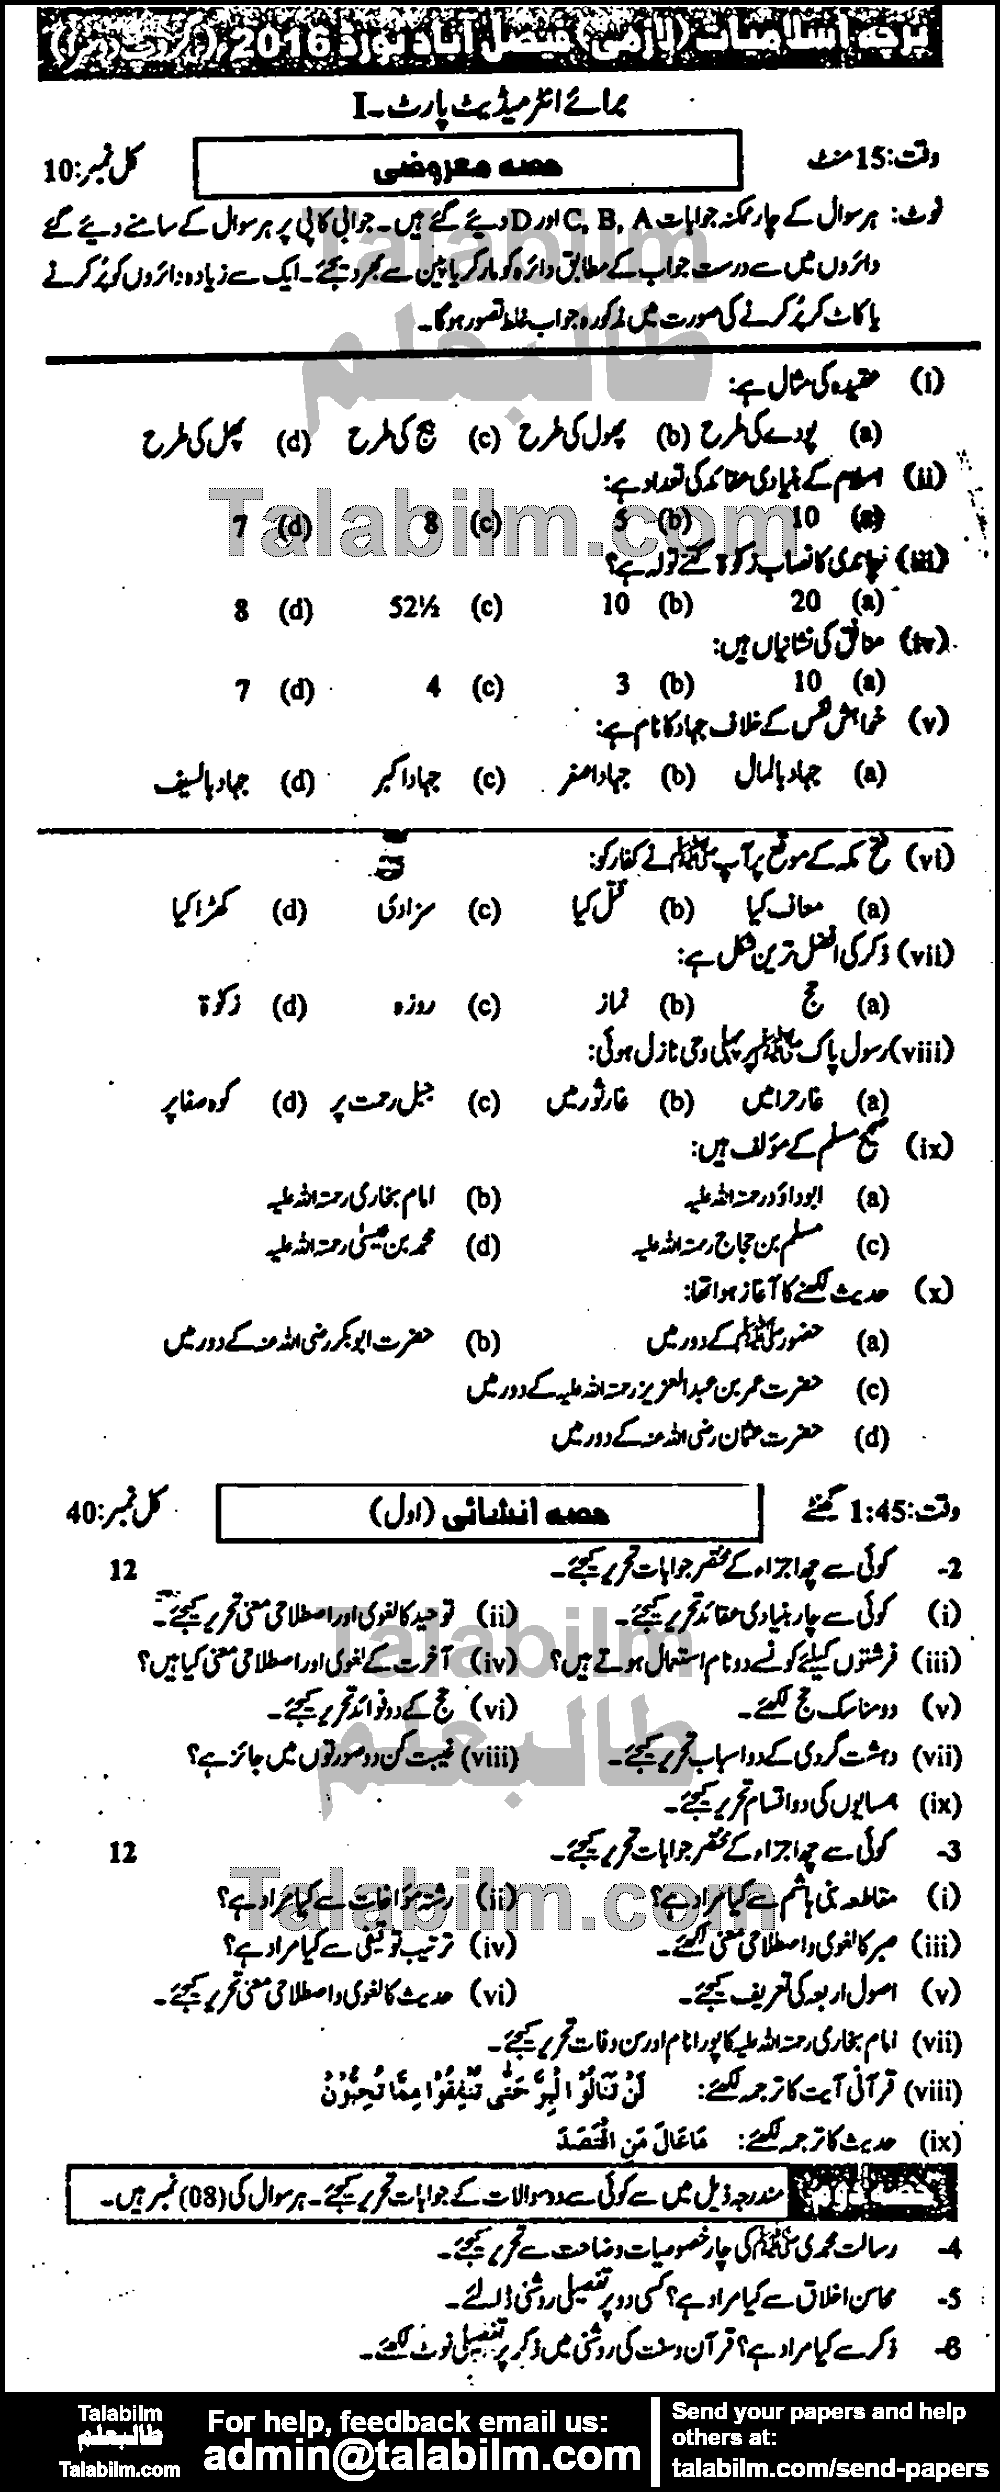 Islamiat Compulsory 0 past paper for Group-II 2016